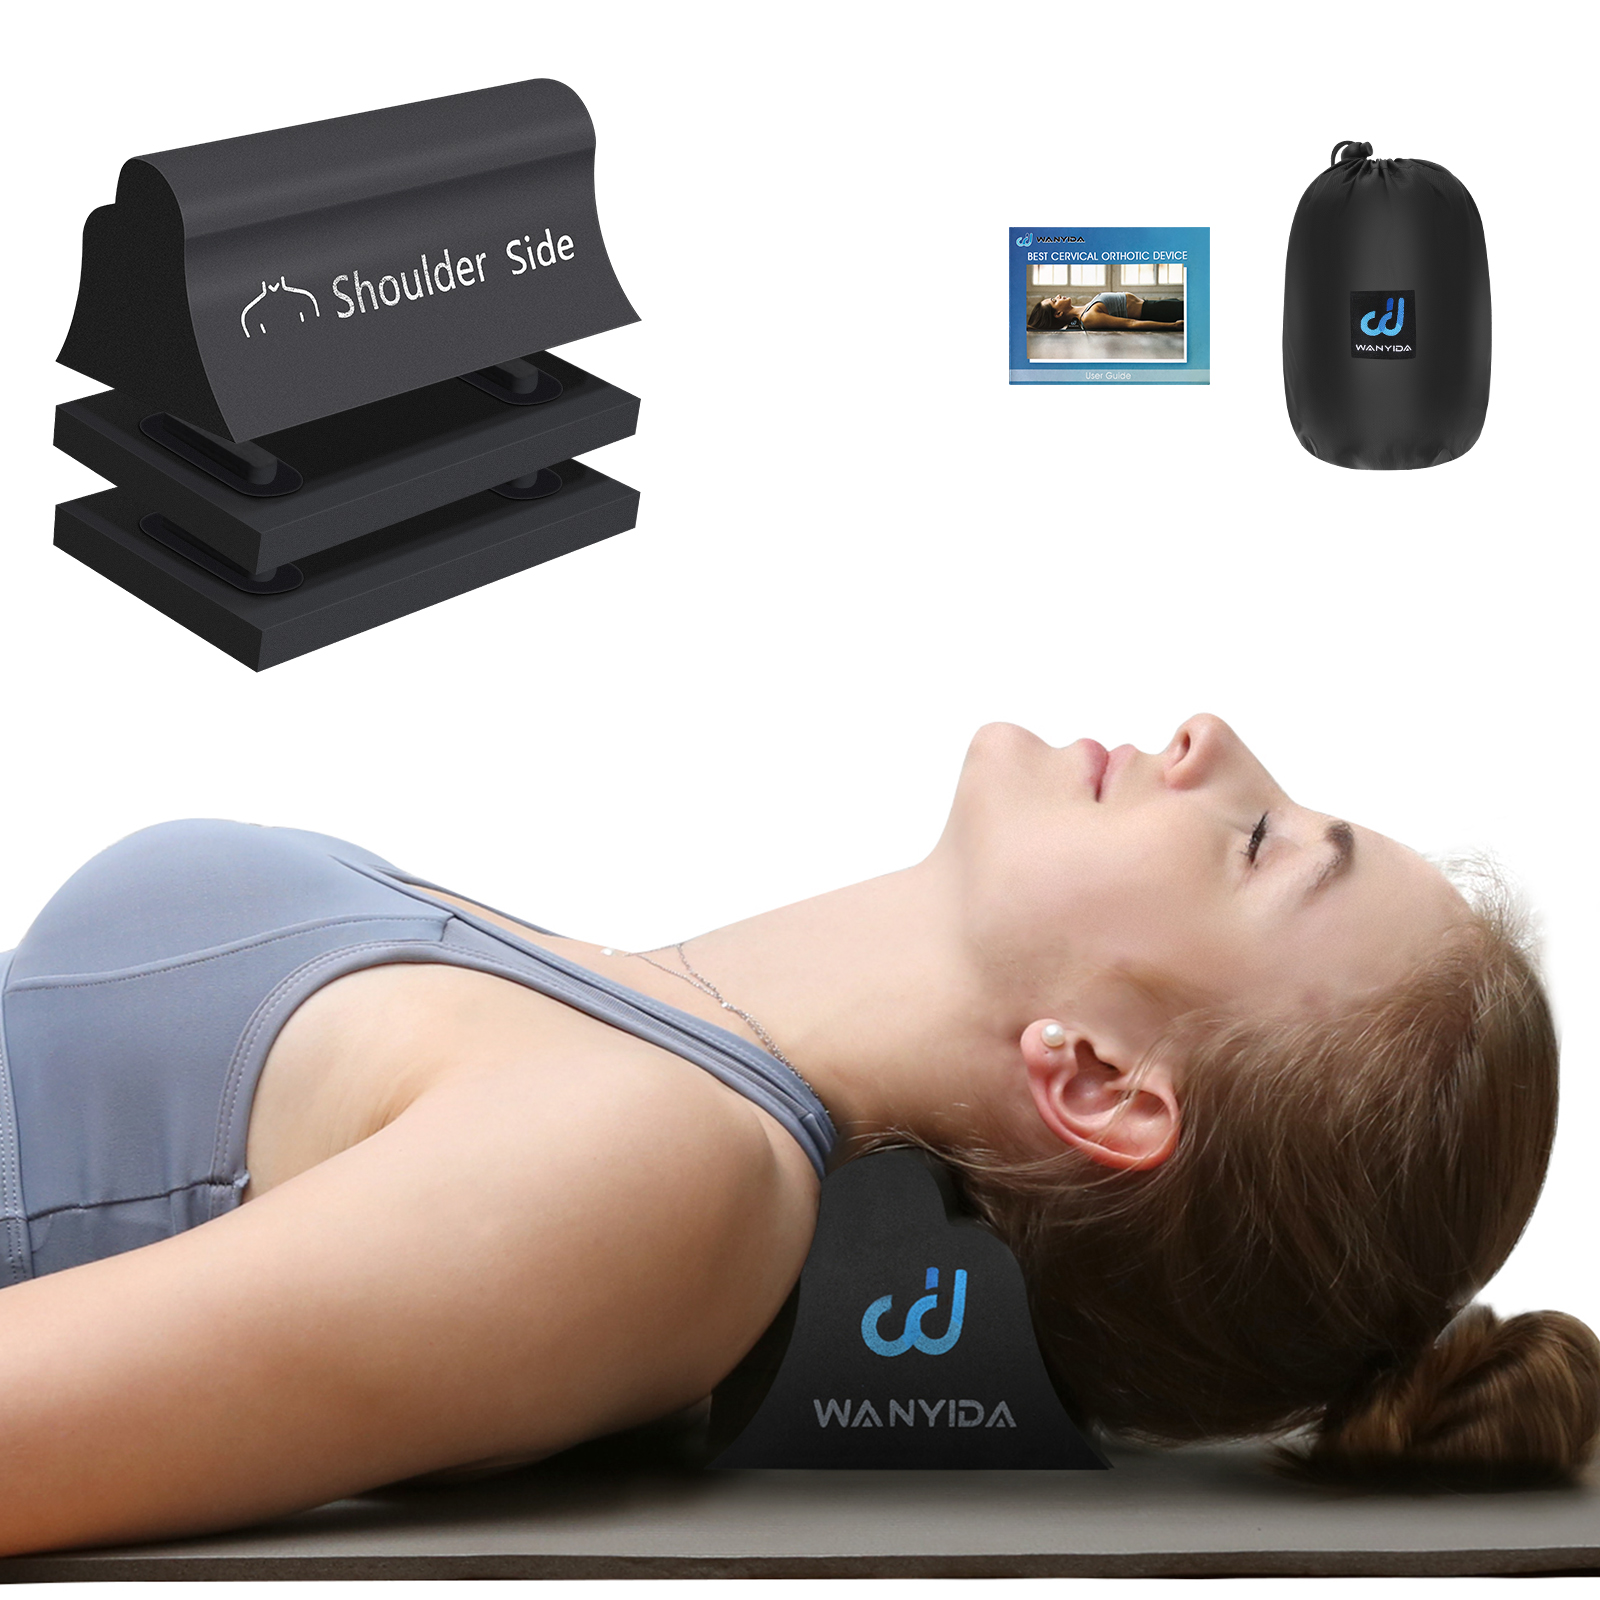 Neck Stretcher Exerciser, Cervical Traction Device for Neck Pain Relief and  Cervical Spine Alignment. Portable Neck Traction Exerciser for Home/Office,  Neck and Shoulder Relaxer Easy to Pull.